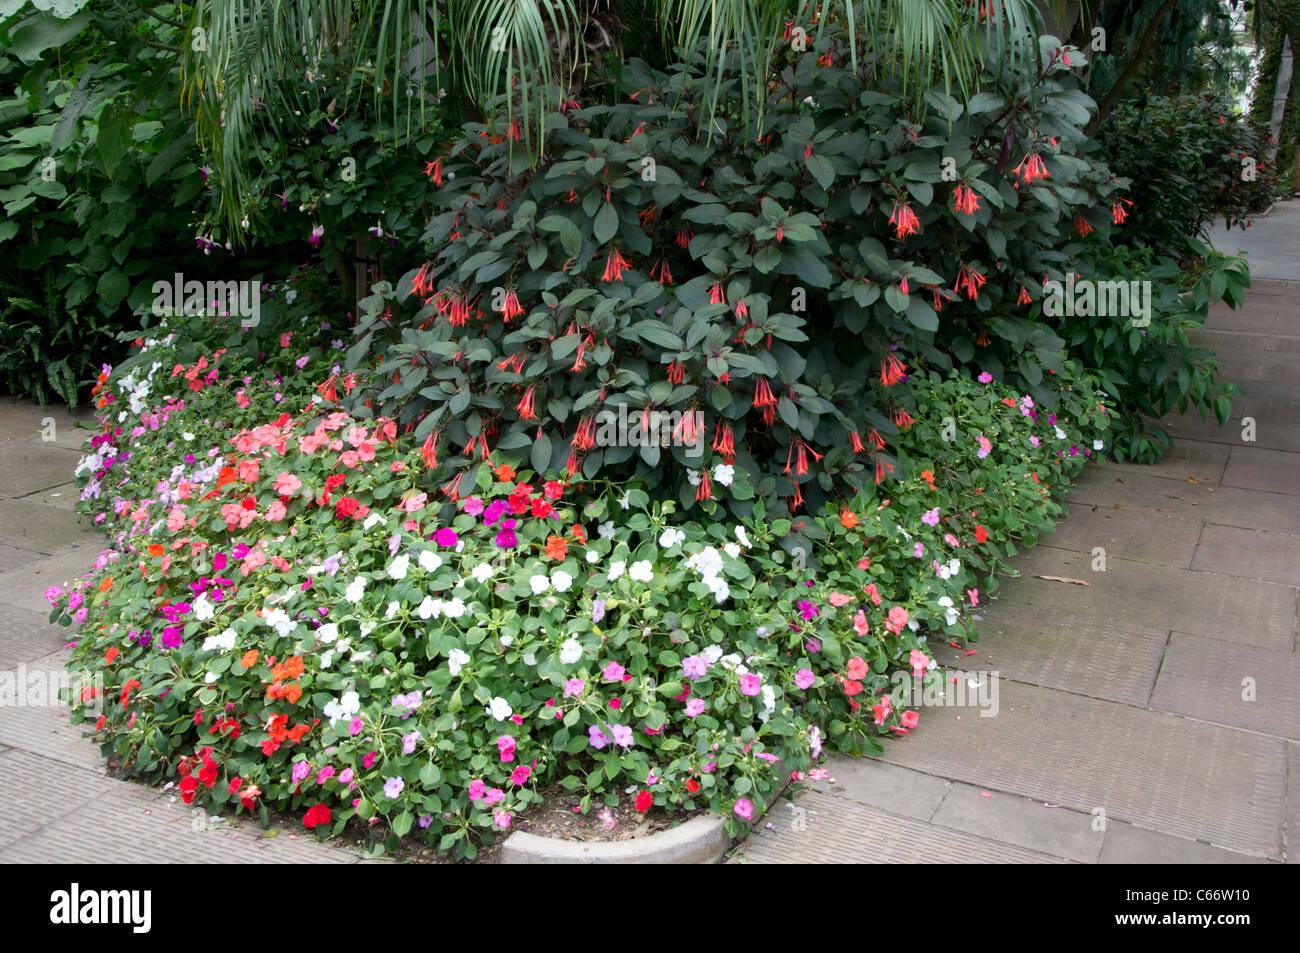 London, Kew Gardens, Royal Horticultural Society - fuchsias and begonias in the Temperate House Stock Photo